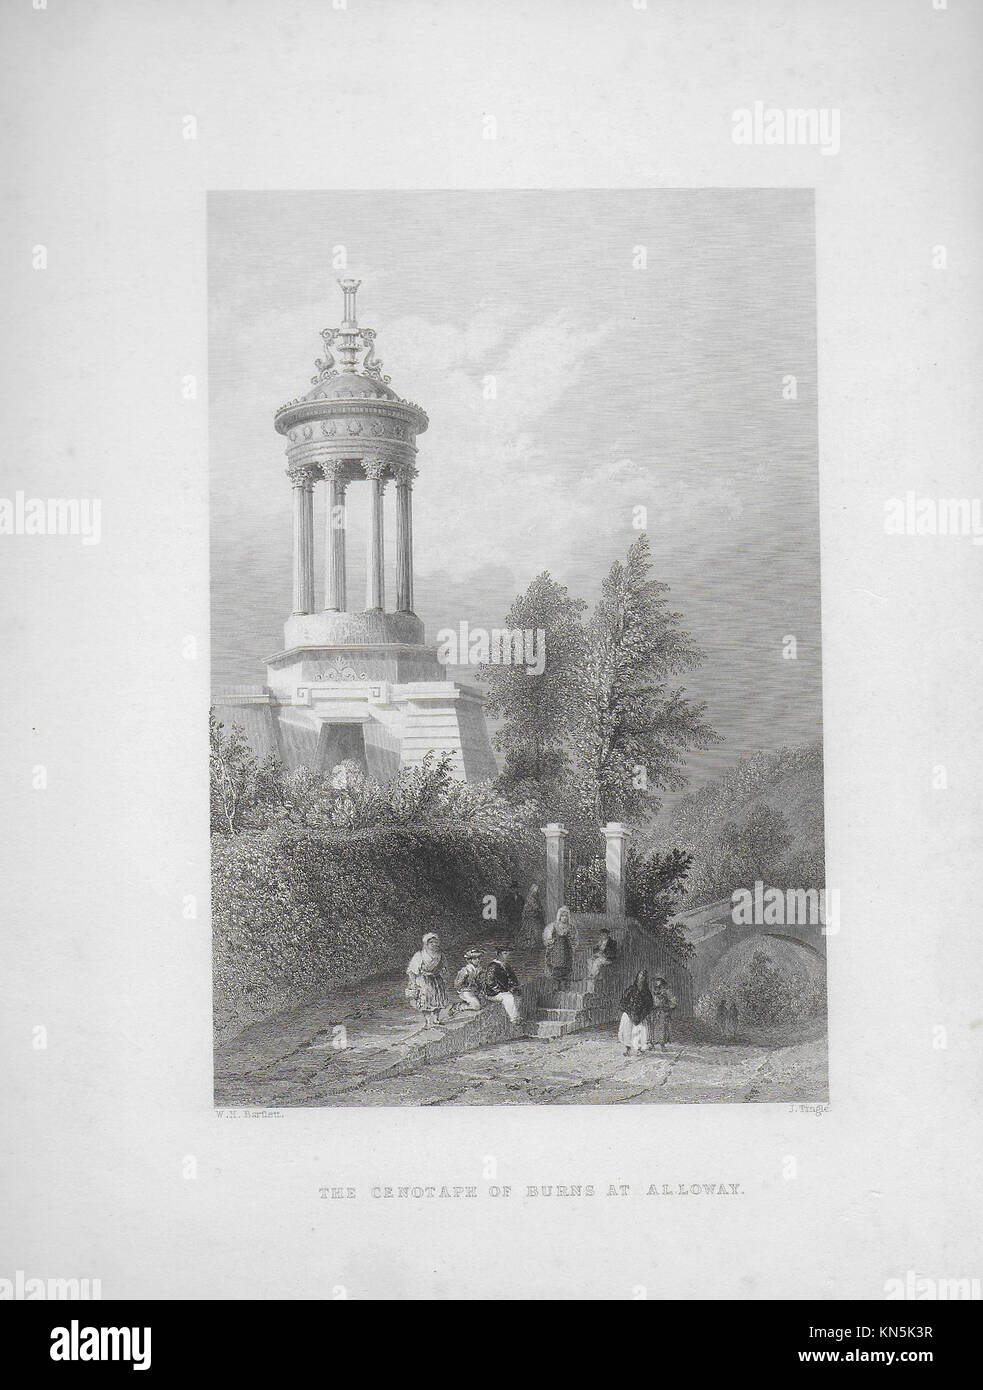 Engravings of Scottish landscapes and buildings from late eighteenth and early nineteenth century, Cenotaph of Robert Burns at Alloway, Scotland Stock Photo